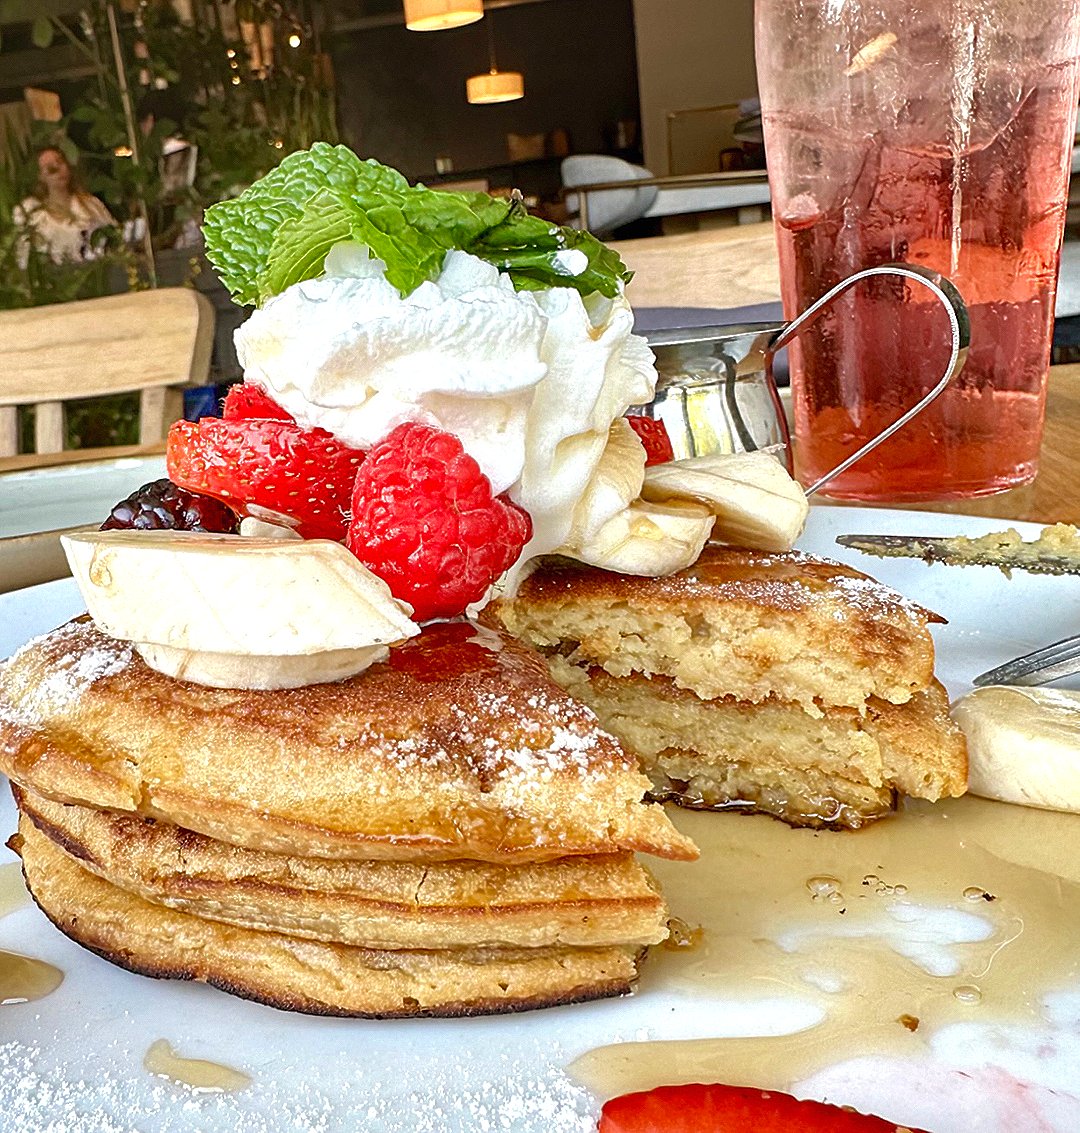 When your pancakes arrive, be vigilant. If you get distracted someone might take a big bite.  #fluffypancakes #vegan #brunch
.
.
.
#chicagobrunch #veganbrunch #sundaybrunch #sundays #pancakes #pancakesundays #breakfast #veganbreakfast